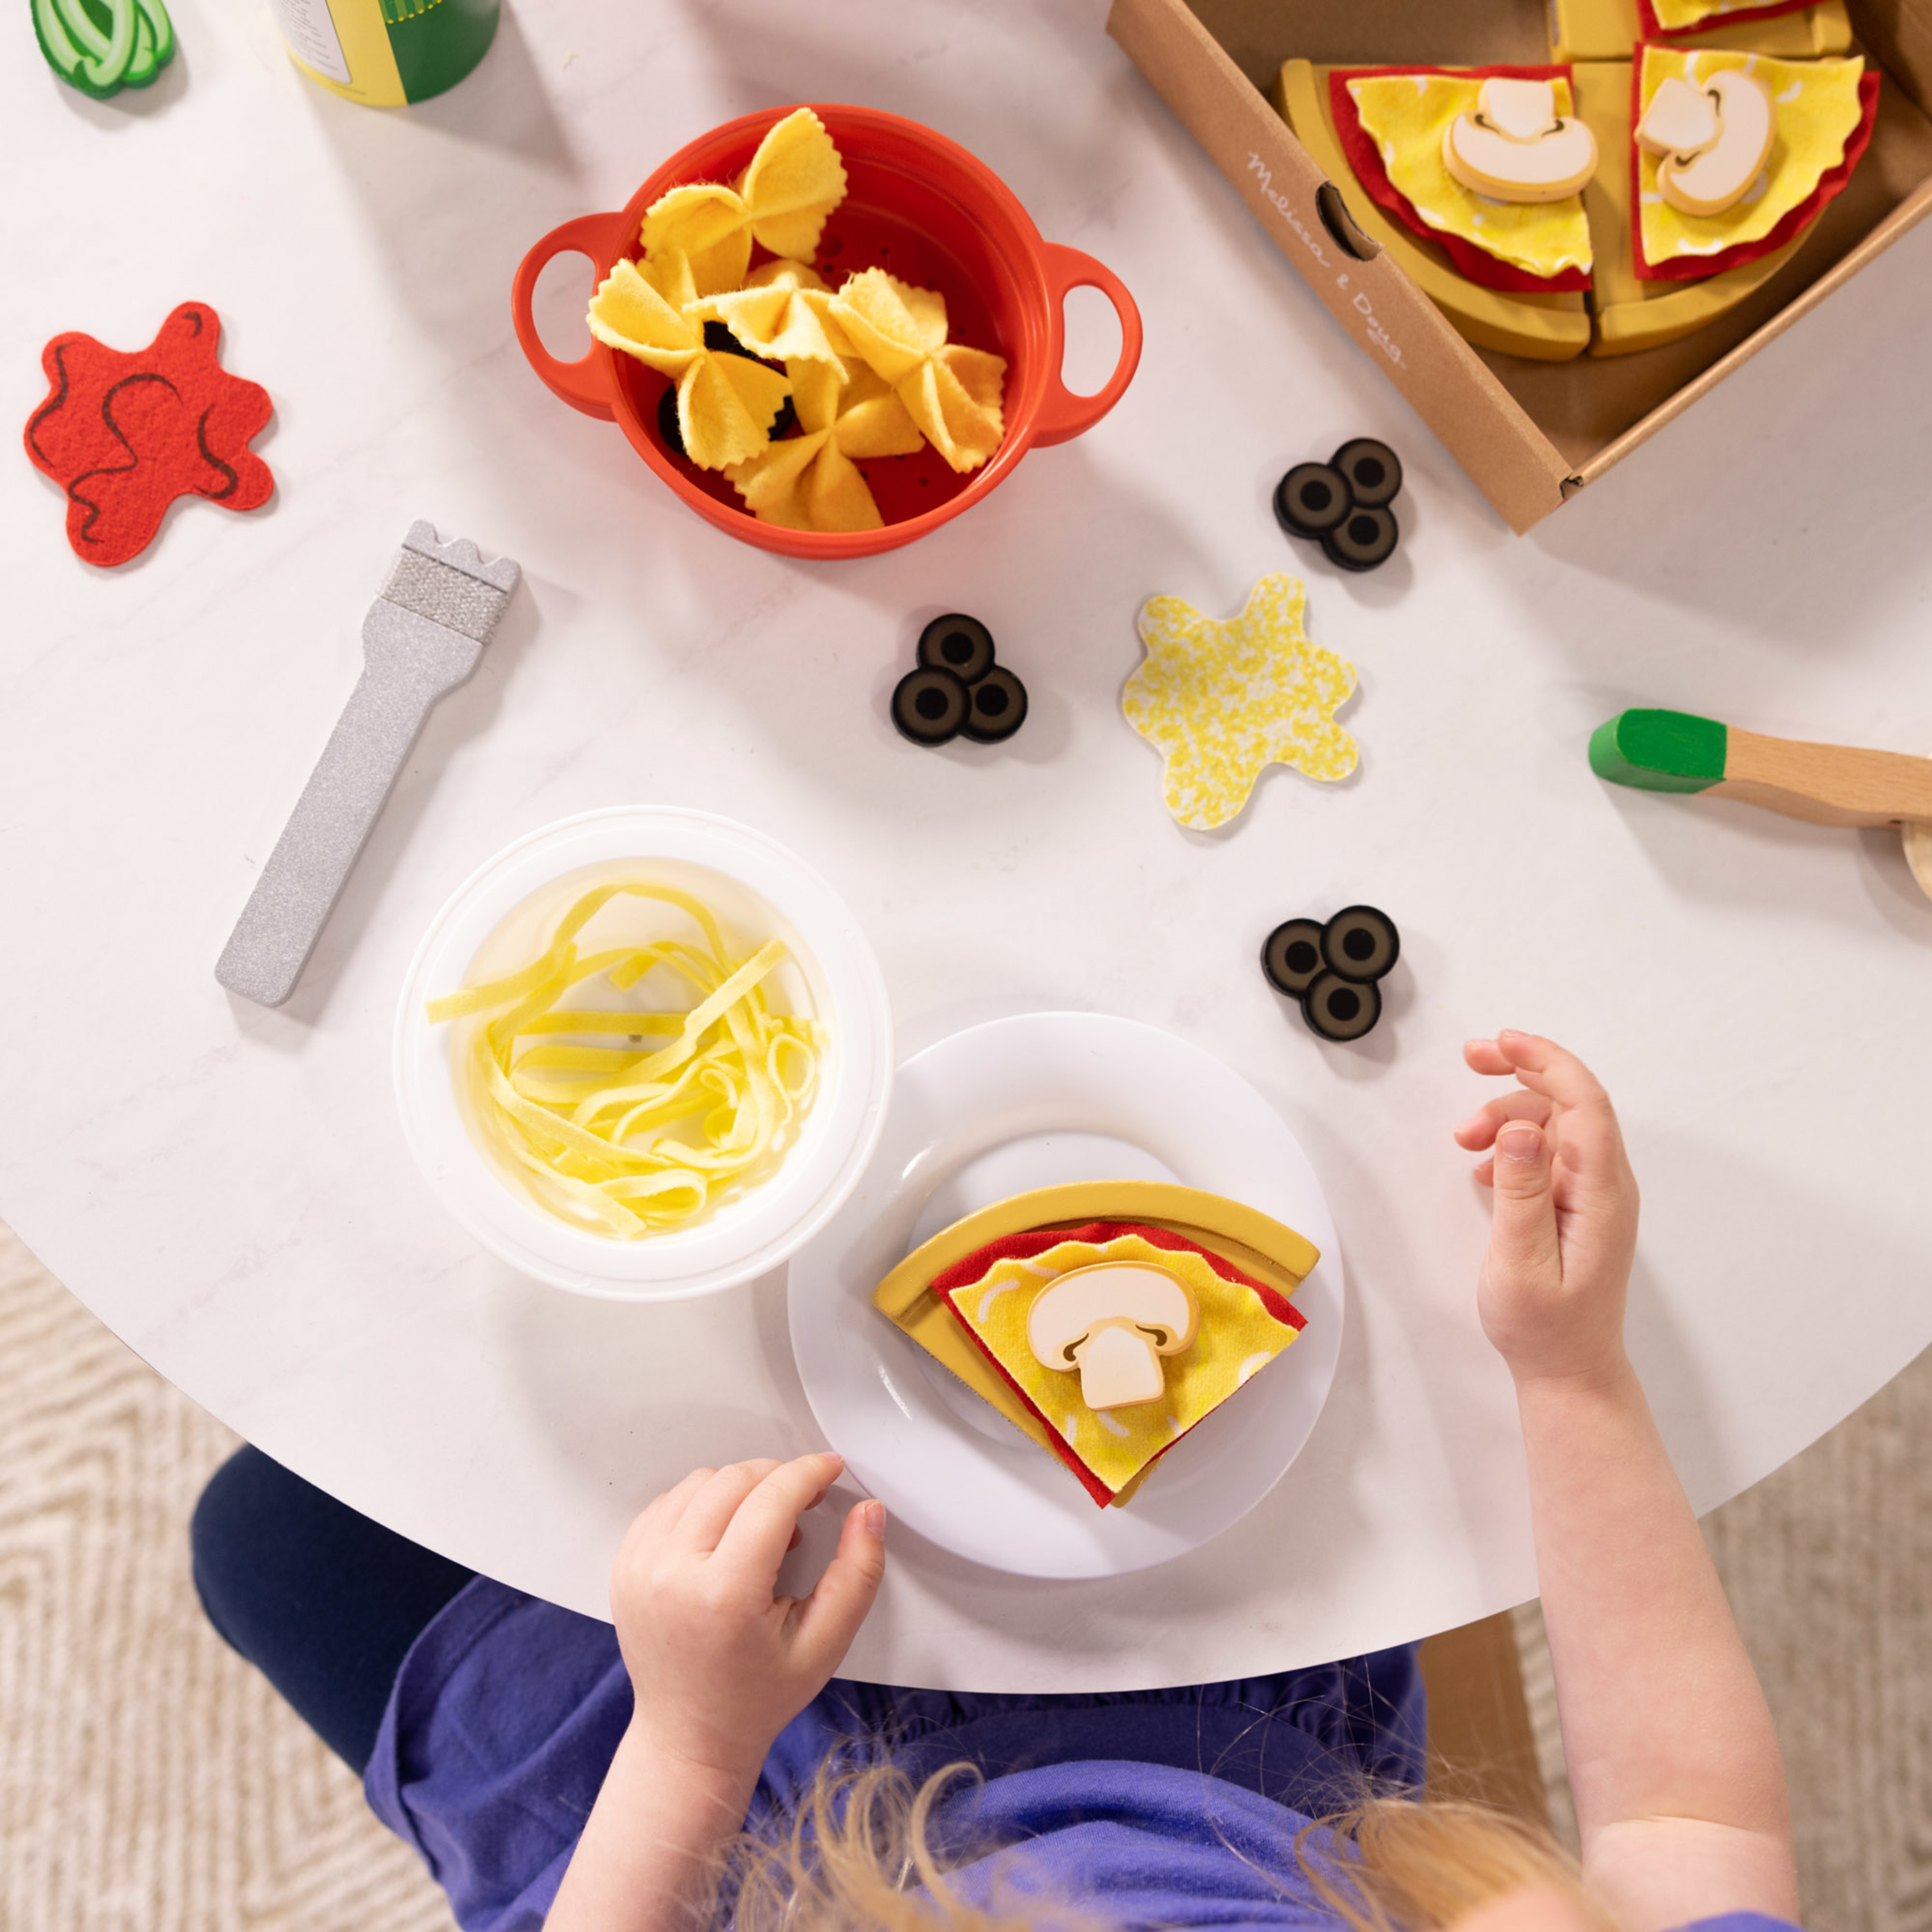 Melissa & Doug Deluxe Pizza & Pasta Play Set Pretend Play Food - 92 Pieces - image 2 of 9